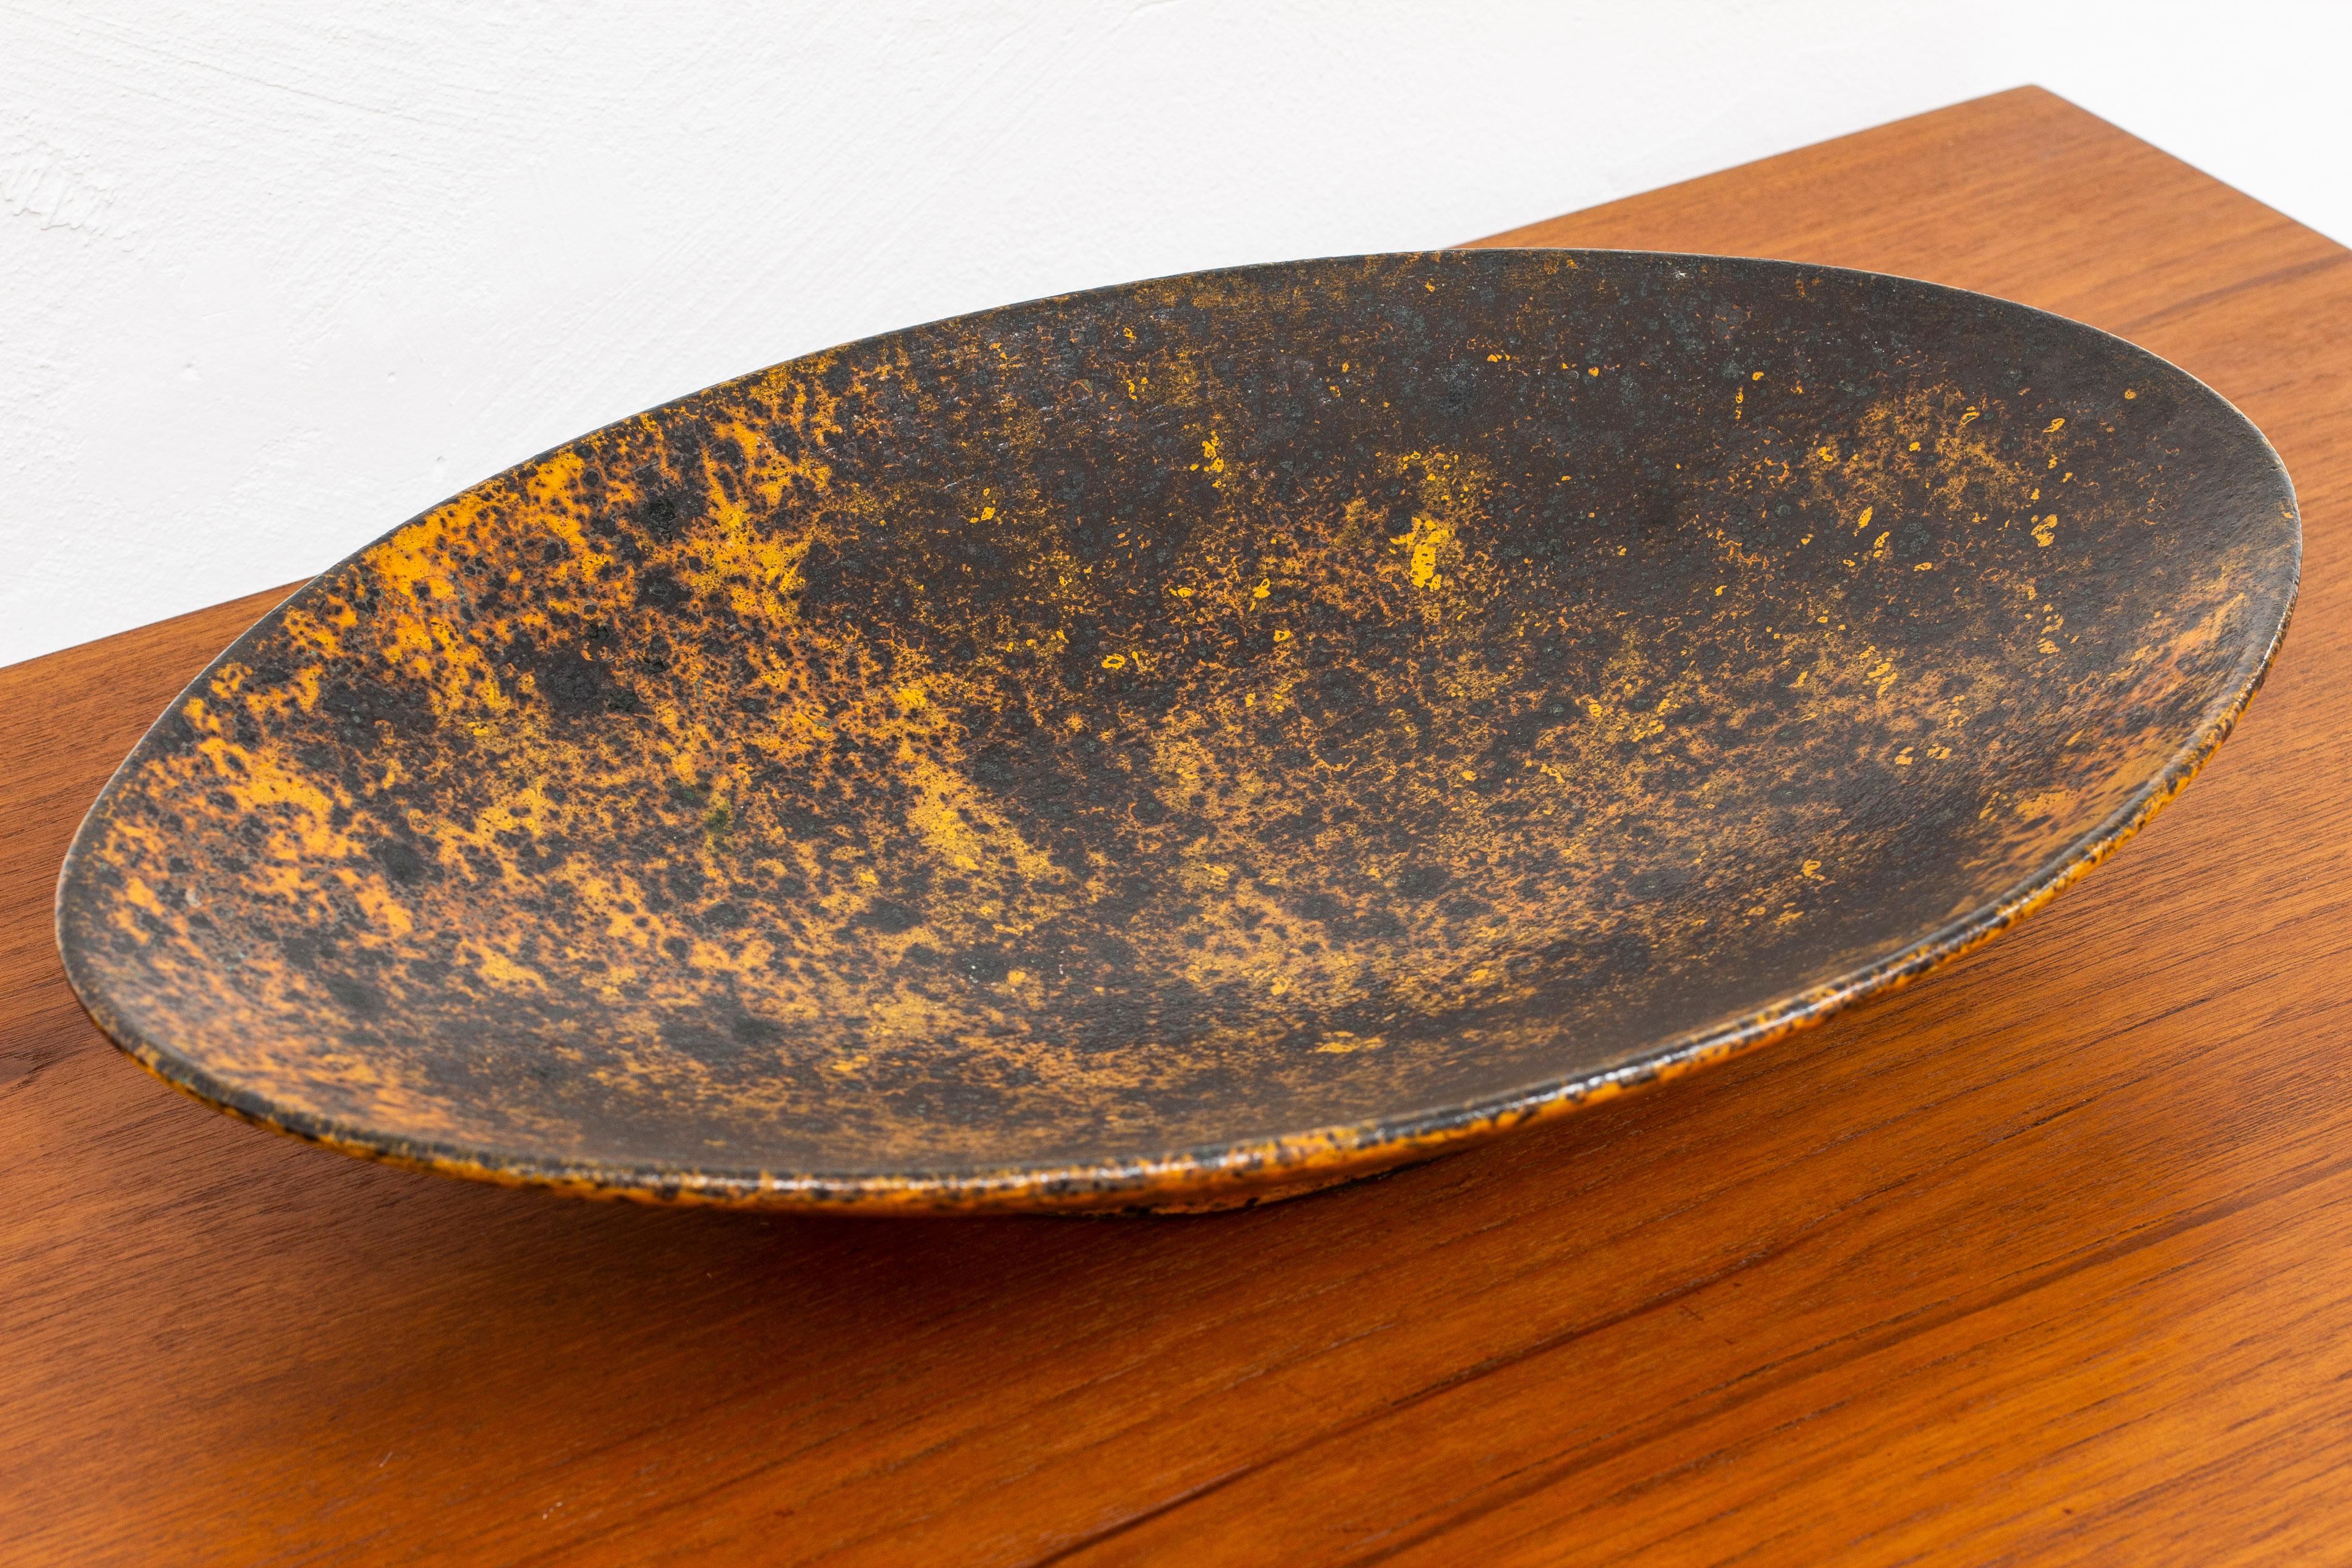 Very large dish designed and made by Hans Hedberg. Hand made in Biot France, second half of the 20th century. Made from stoneware with glaze shifting in deep blue/purple and orange. Signed underneath with his Hallmark. Very good vintage condition